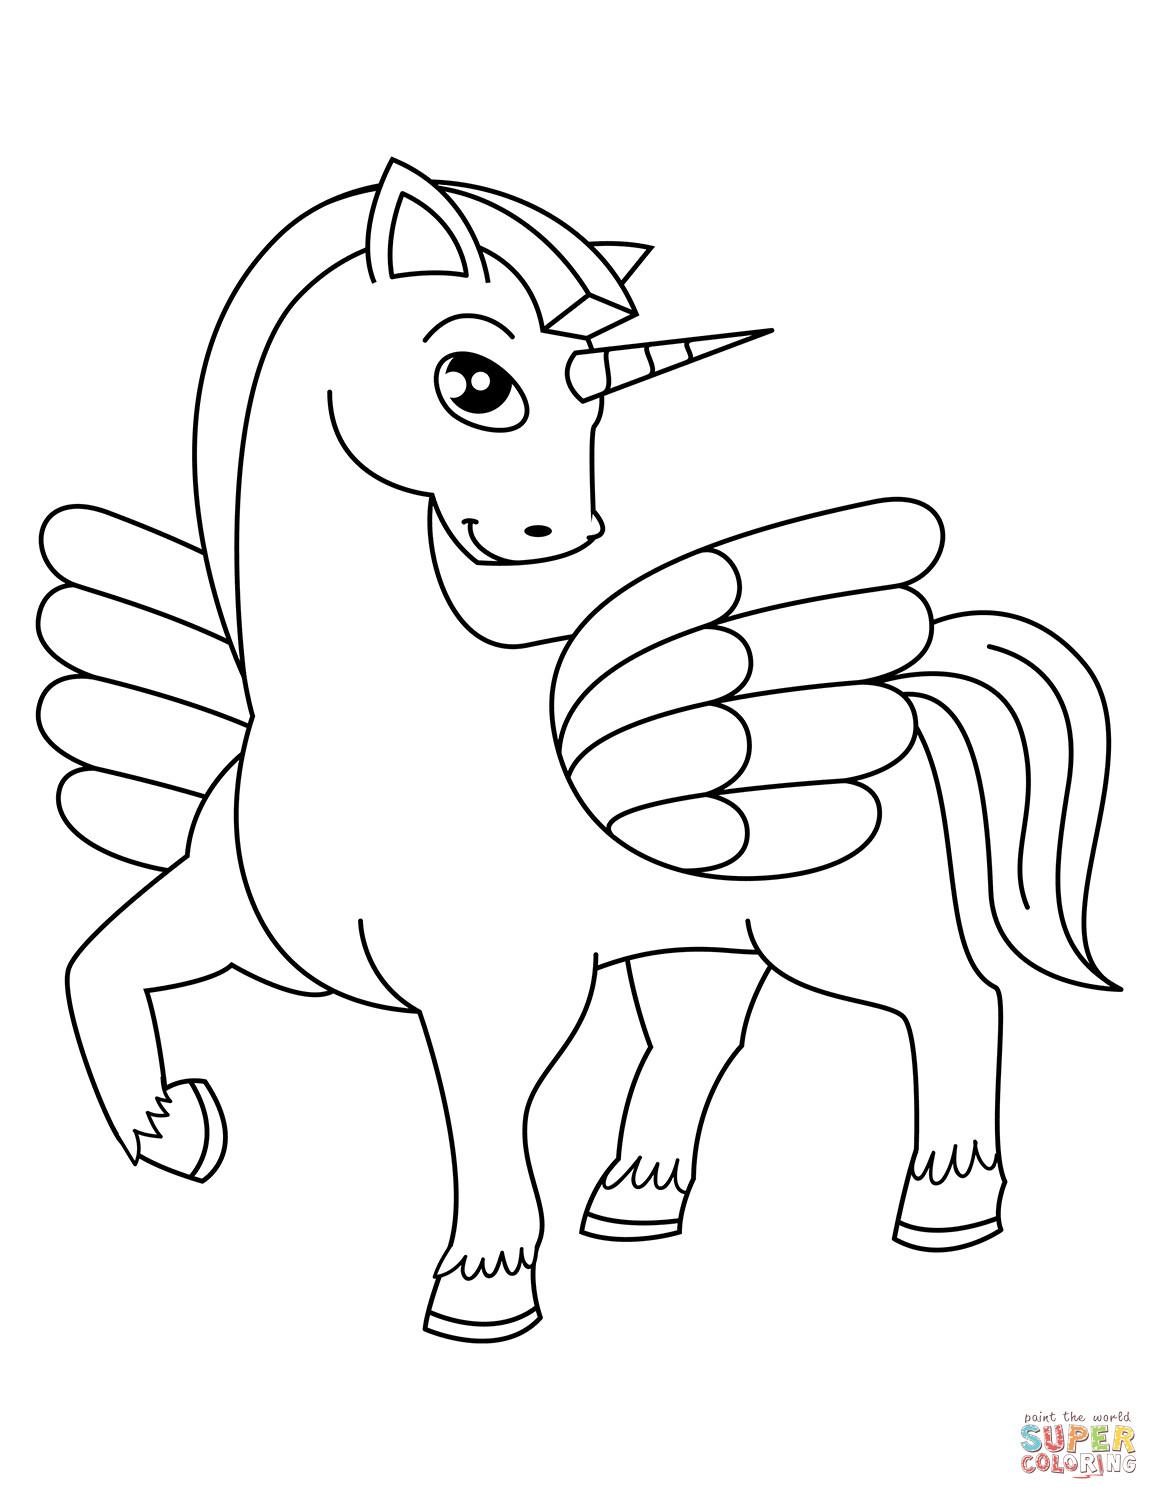 Free Printable Coloring Pages Of Unicorns
 Cute Winged Unicorn coloring page